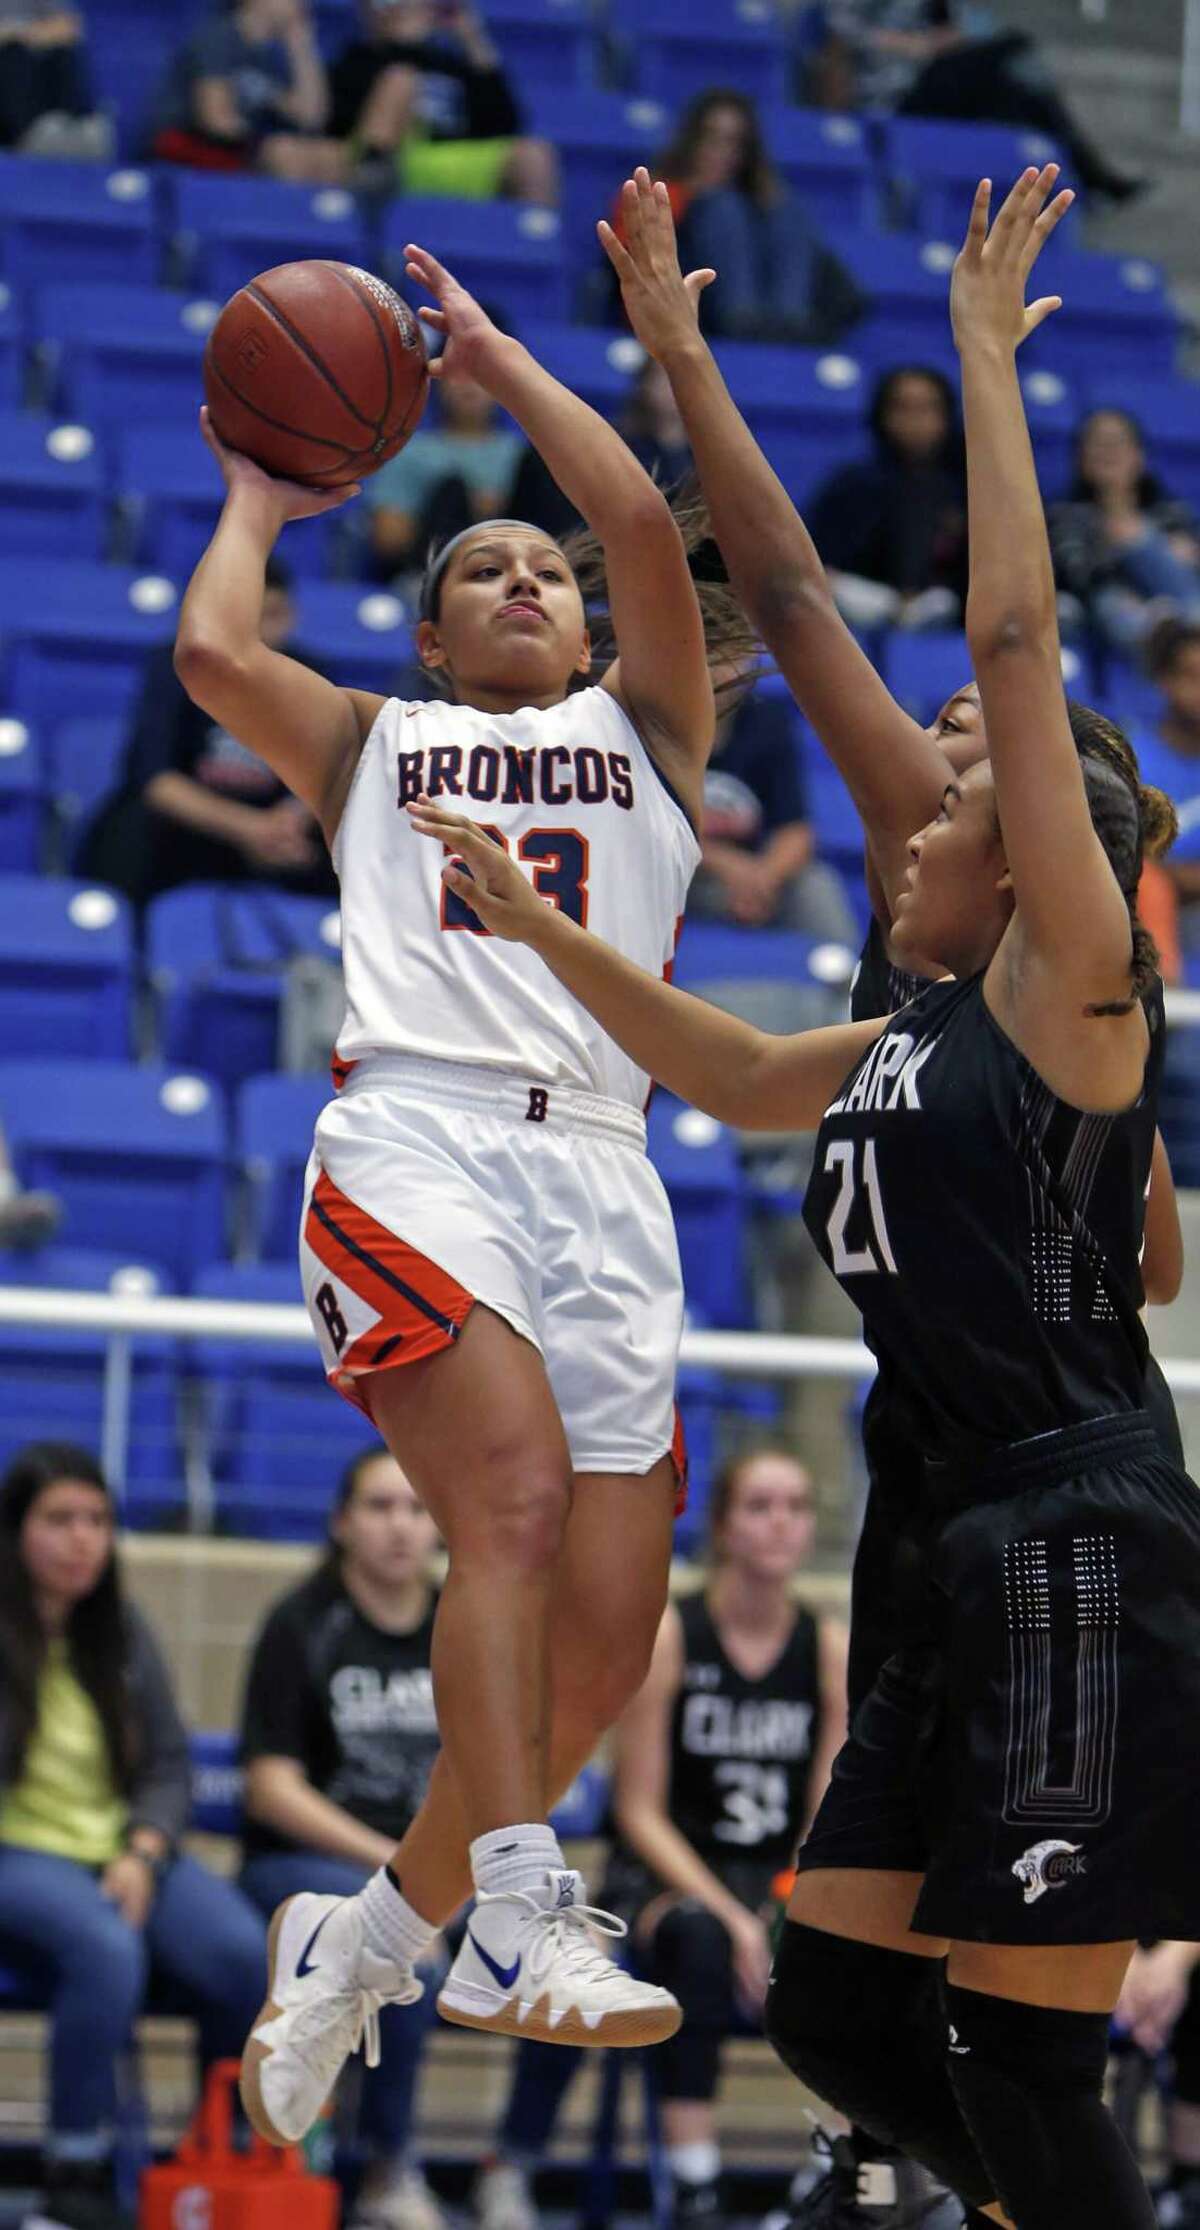 Brandeis Arriana Villa shoots over Clark Kayla Harris in girls basketball game on Saturday, January 12, 2019 at Northside Gym.